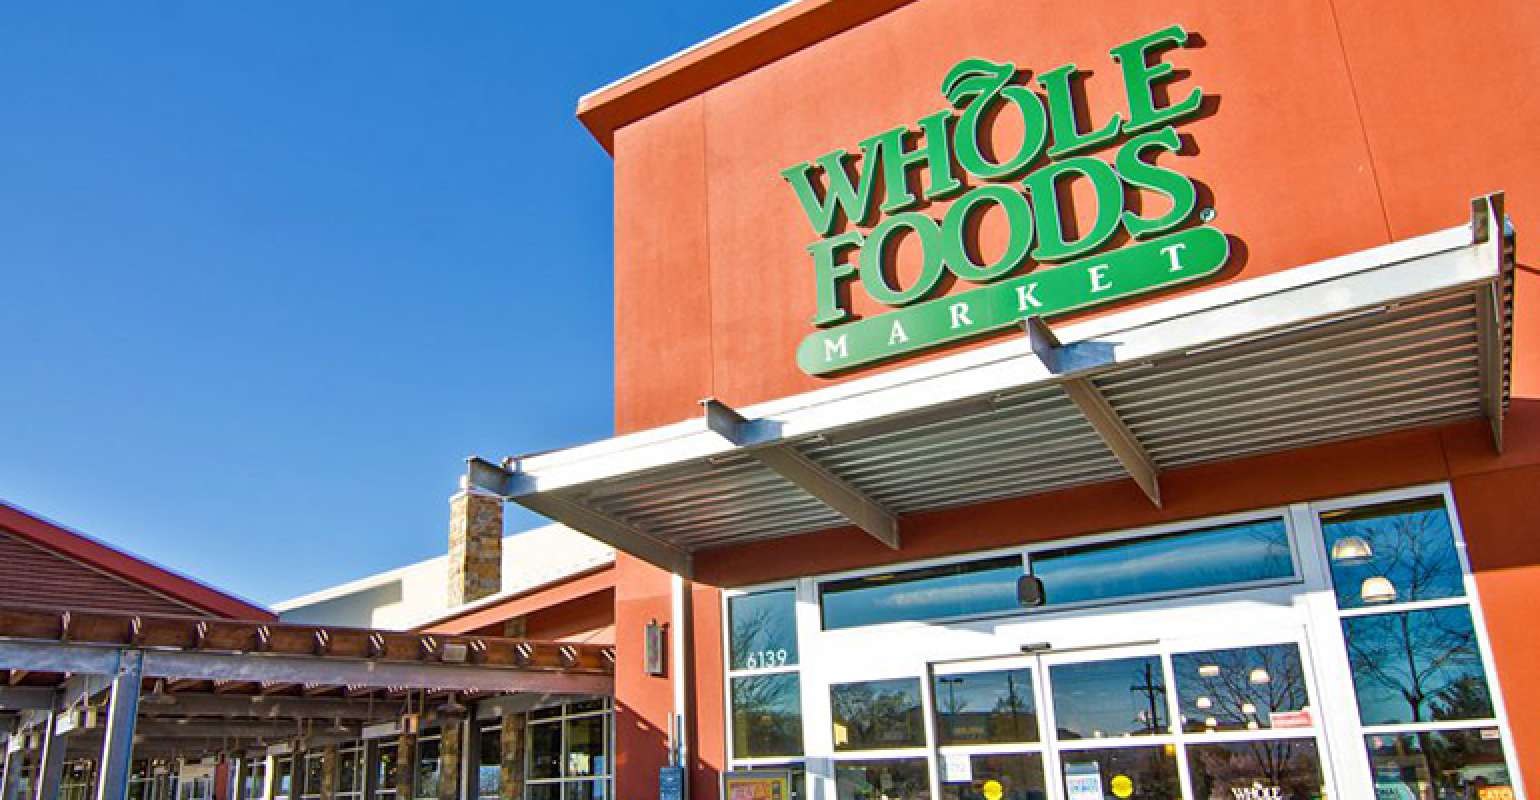 Whole Foods store employees look to unionize Supermarket News